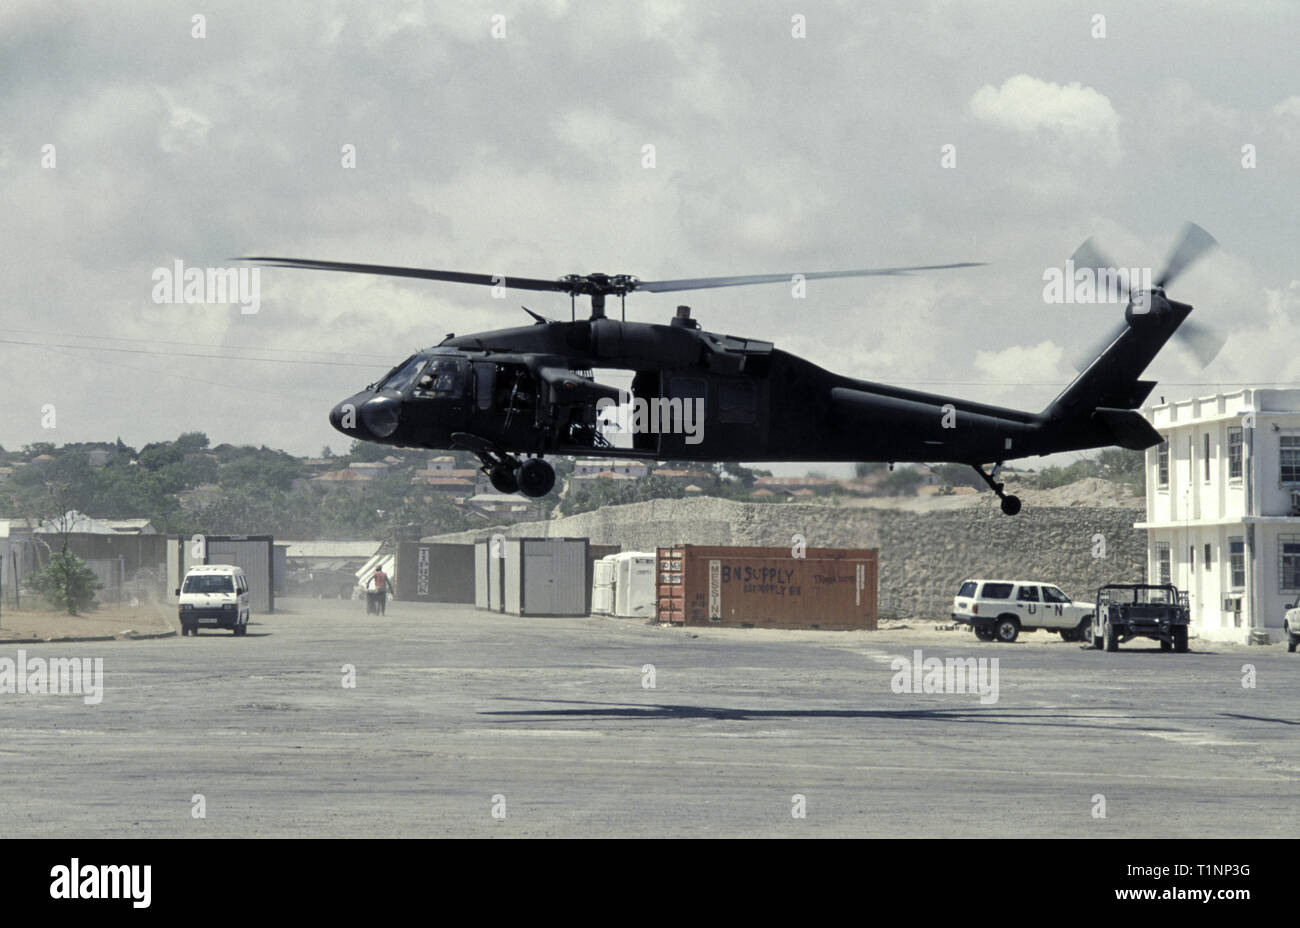 29th October 1993 A U.S. Army Sikorsky UH-60 Black Hawk helicopter landing in the new port in Mogadishu, Somalia. Stock Photo